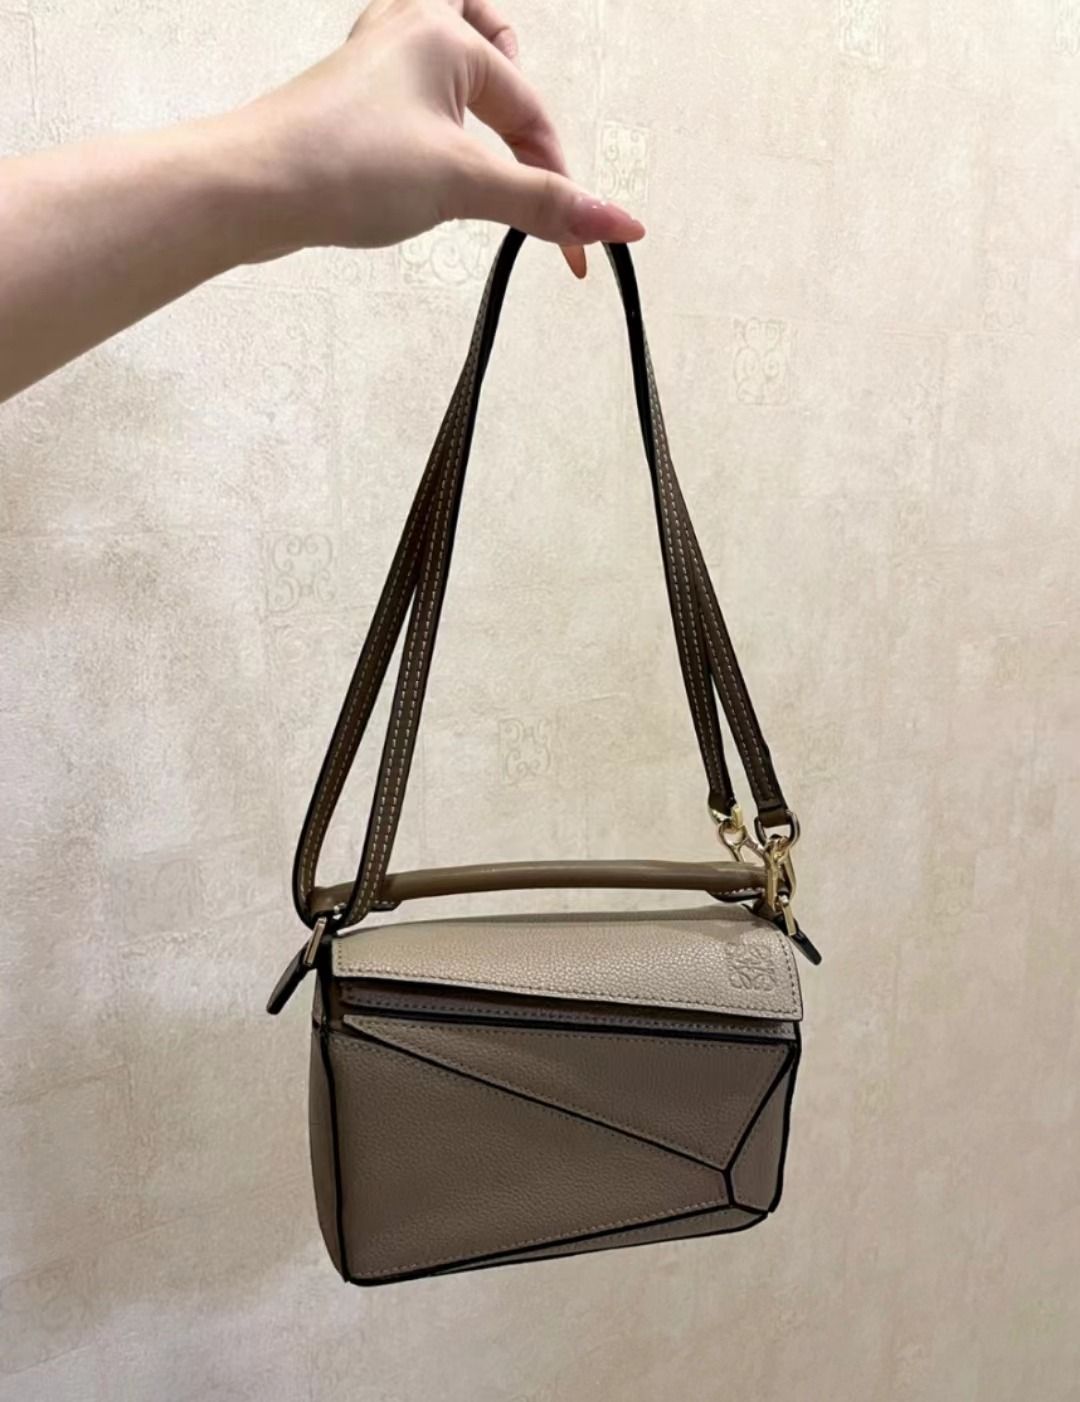 Round 2! Help me choose a Loewe puzzle or flamenco (updated photos